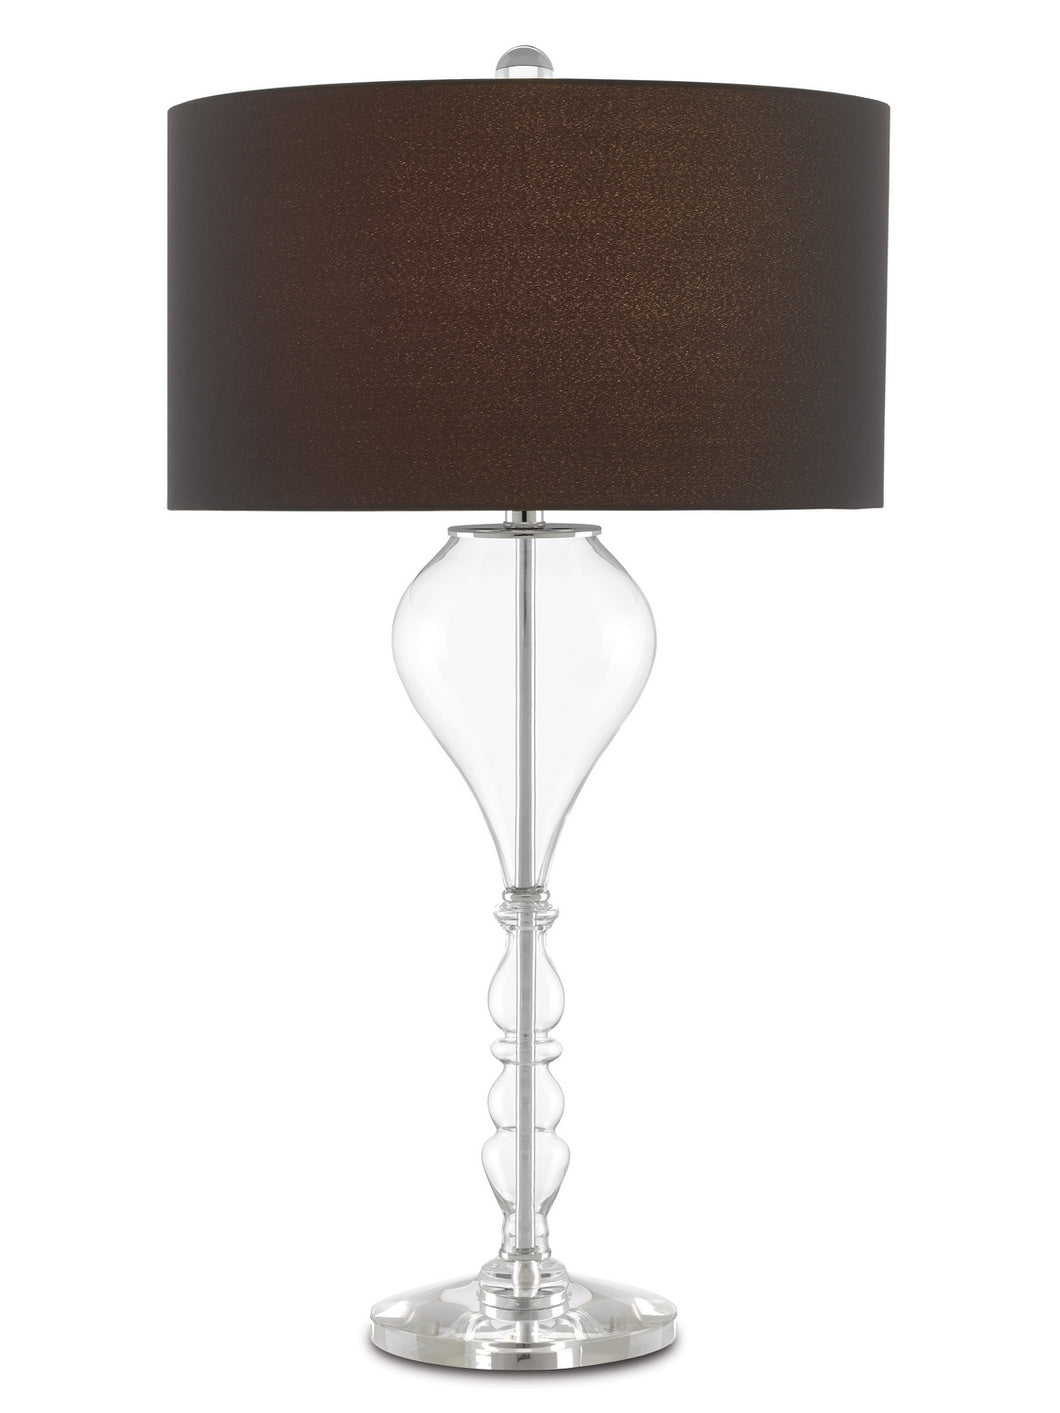 Currey and Company - 6000-0652 - One Light Table Lamp - Aphelion